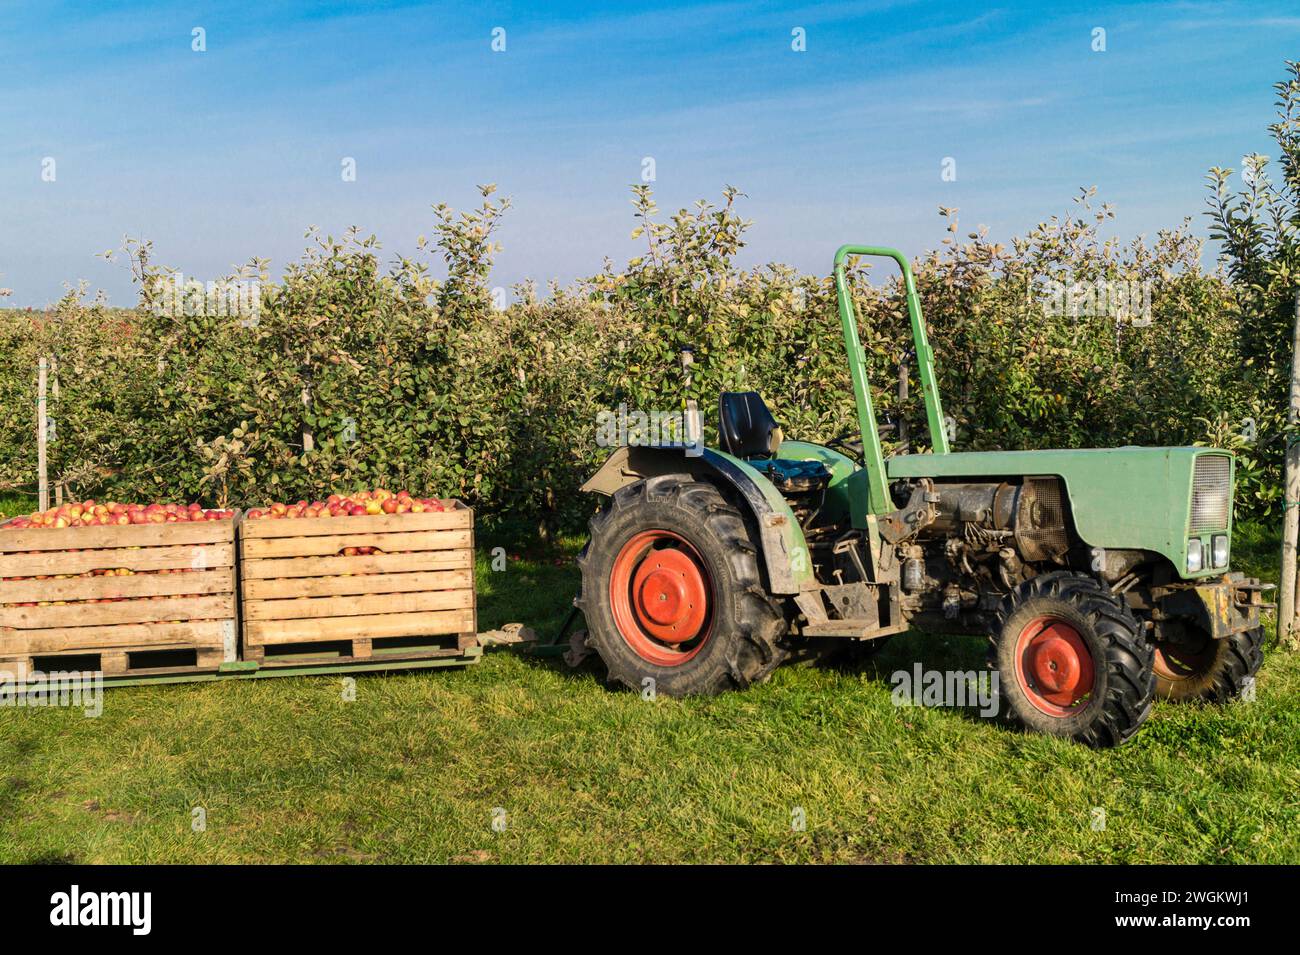 apple tree (Malus domestica), tractor with harvested apples in large wooden crates on an apple orchard, apple harvest, Germany Stock Photo